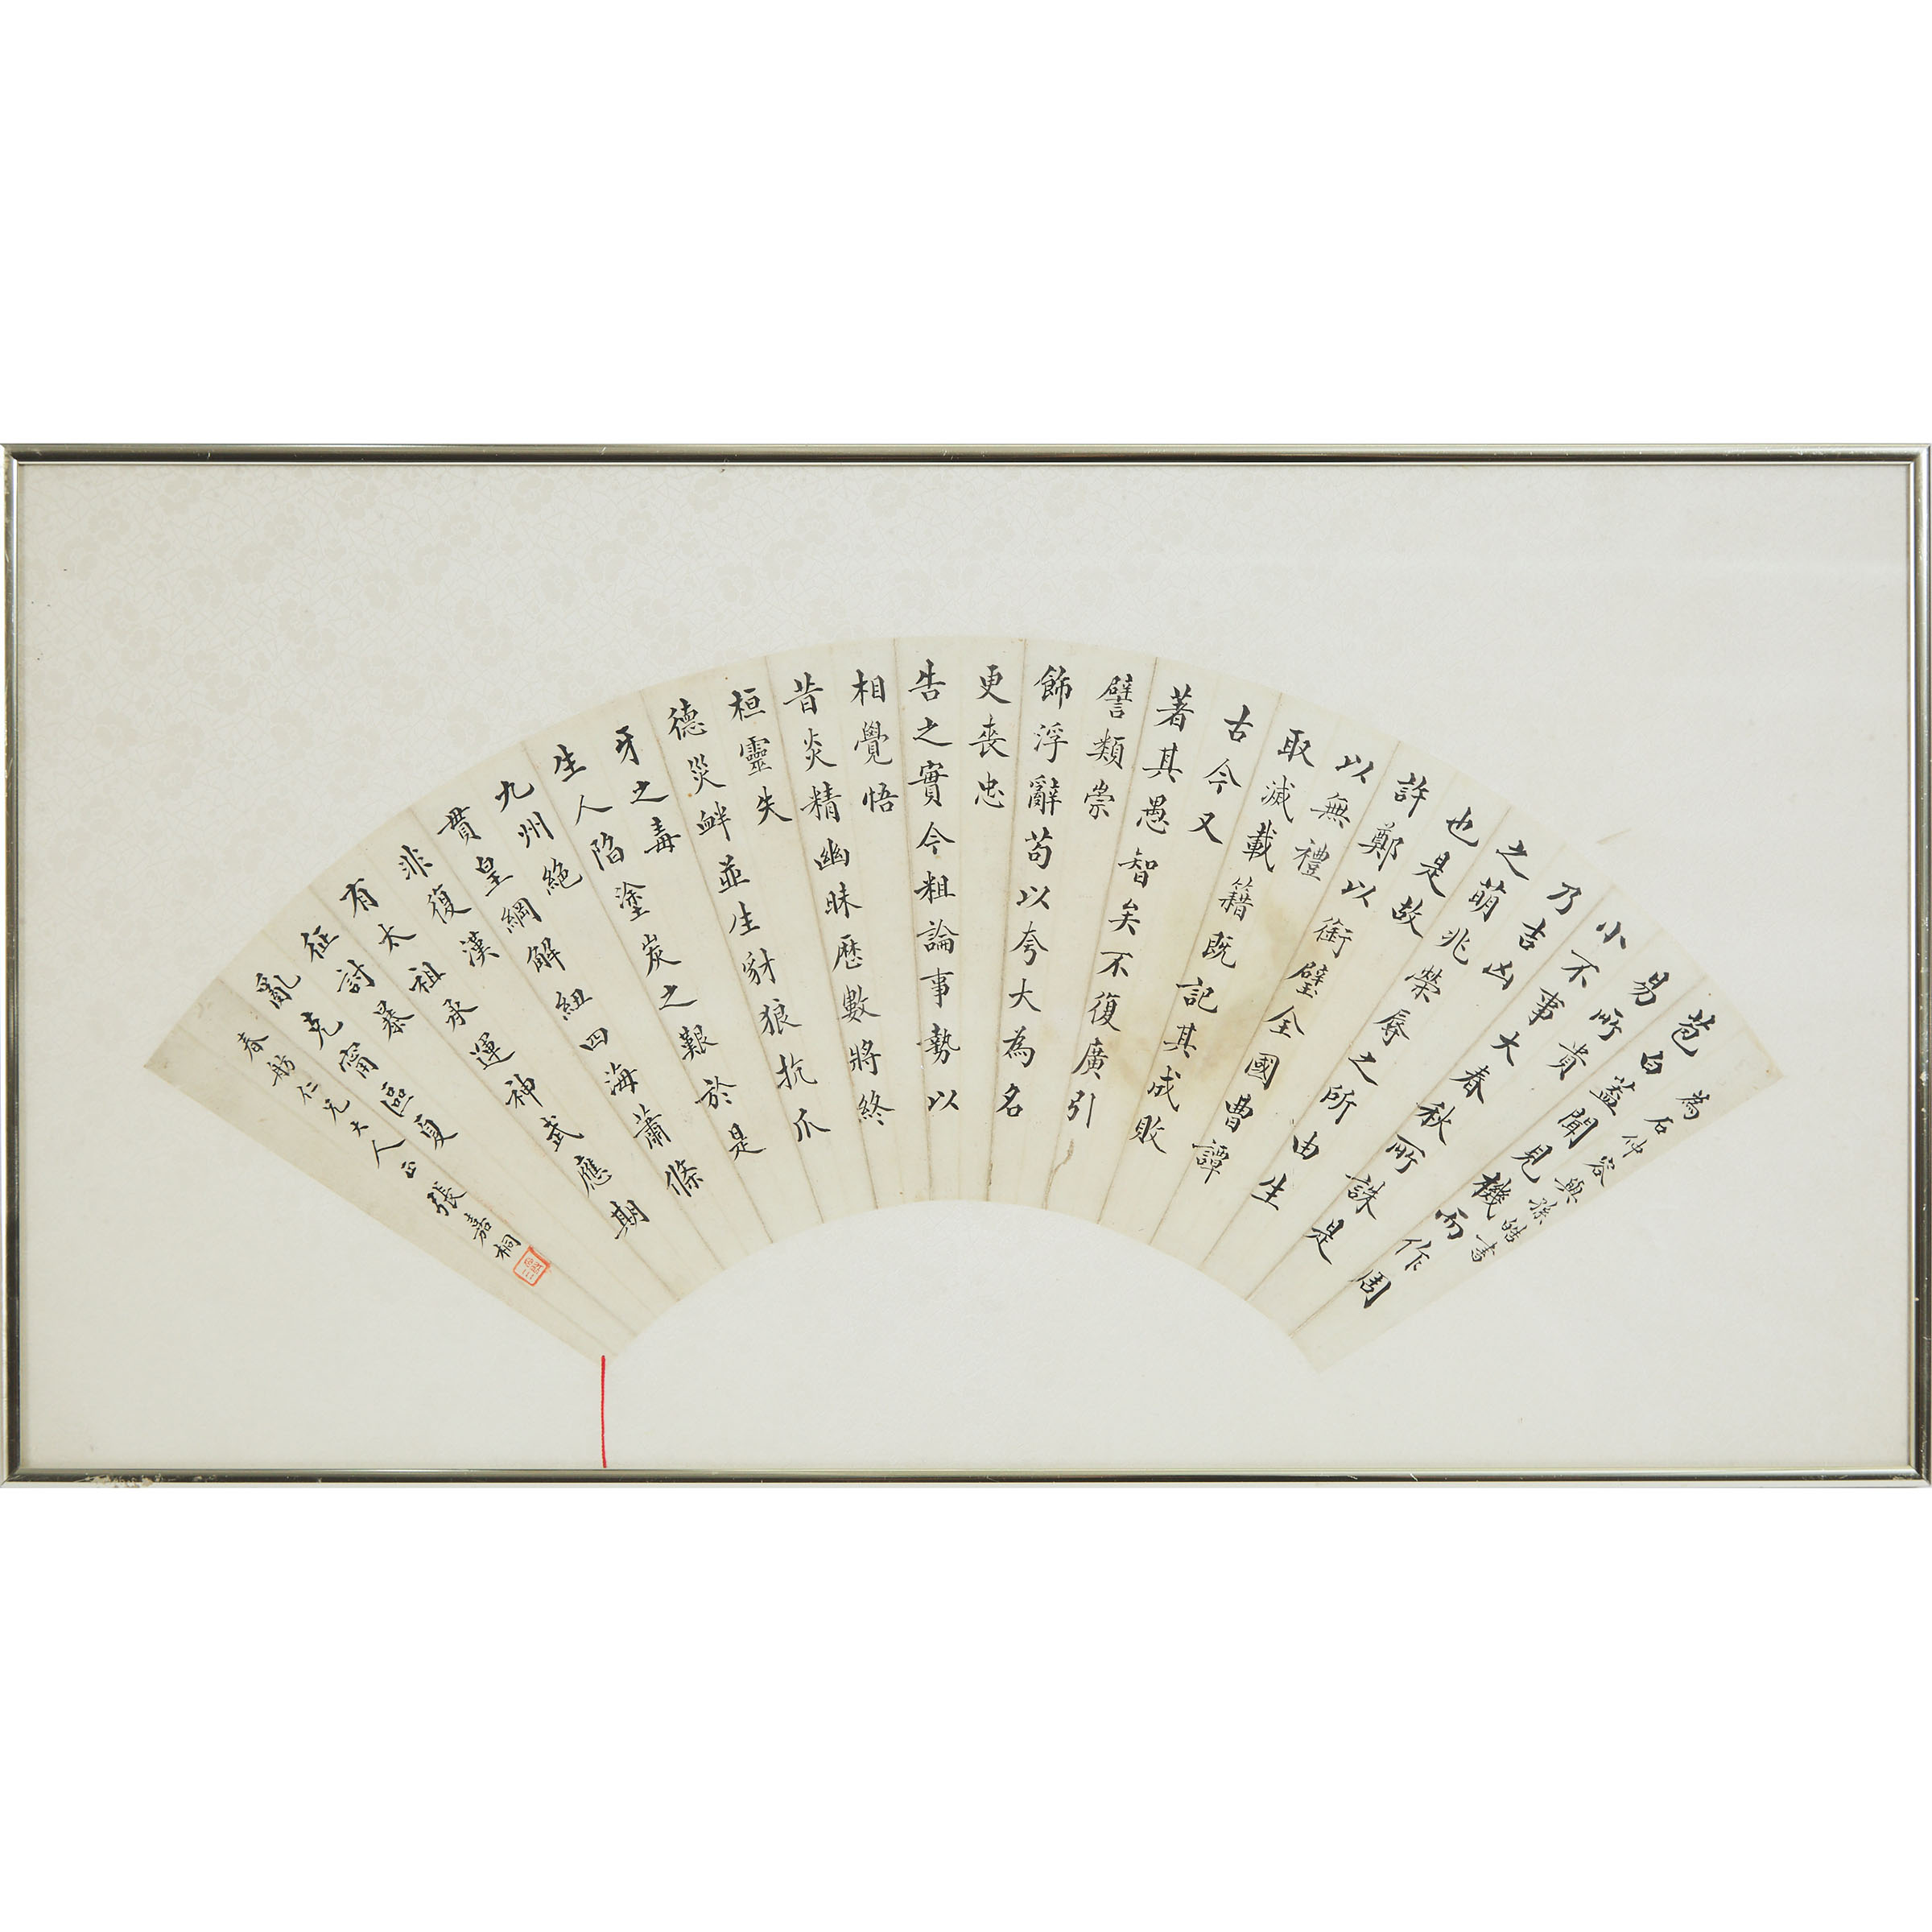 A Chinese Fan Painting of Calligraphy, Signed Zhang Jiatong, Late Qing/Republican Period